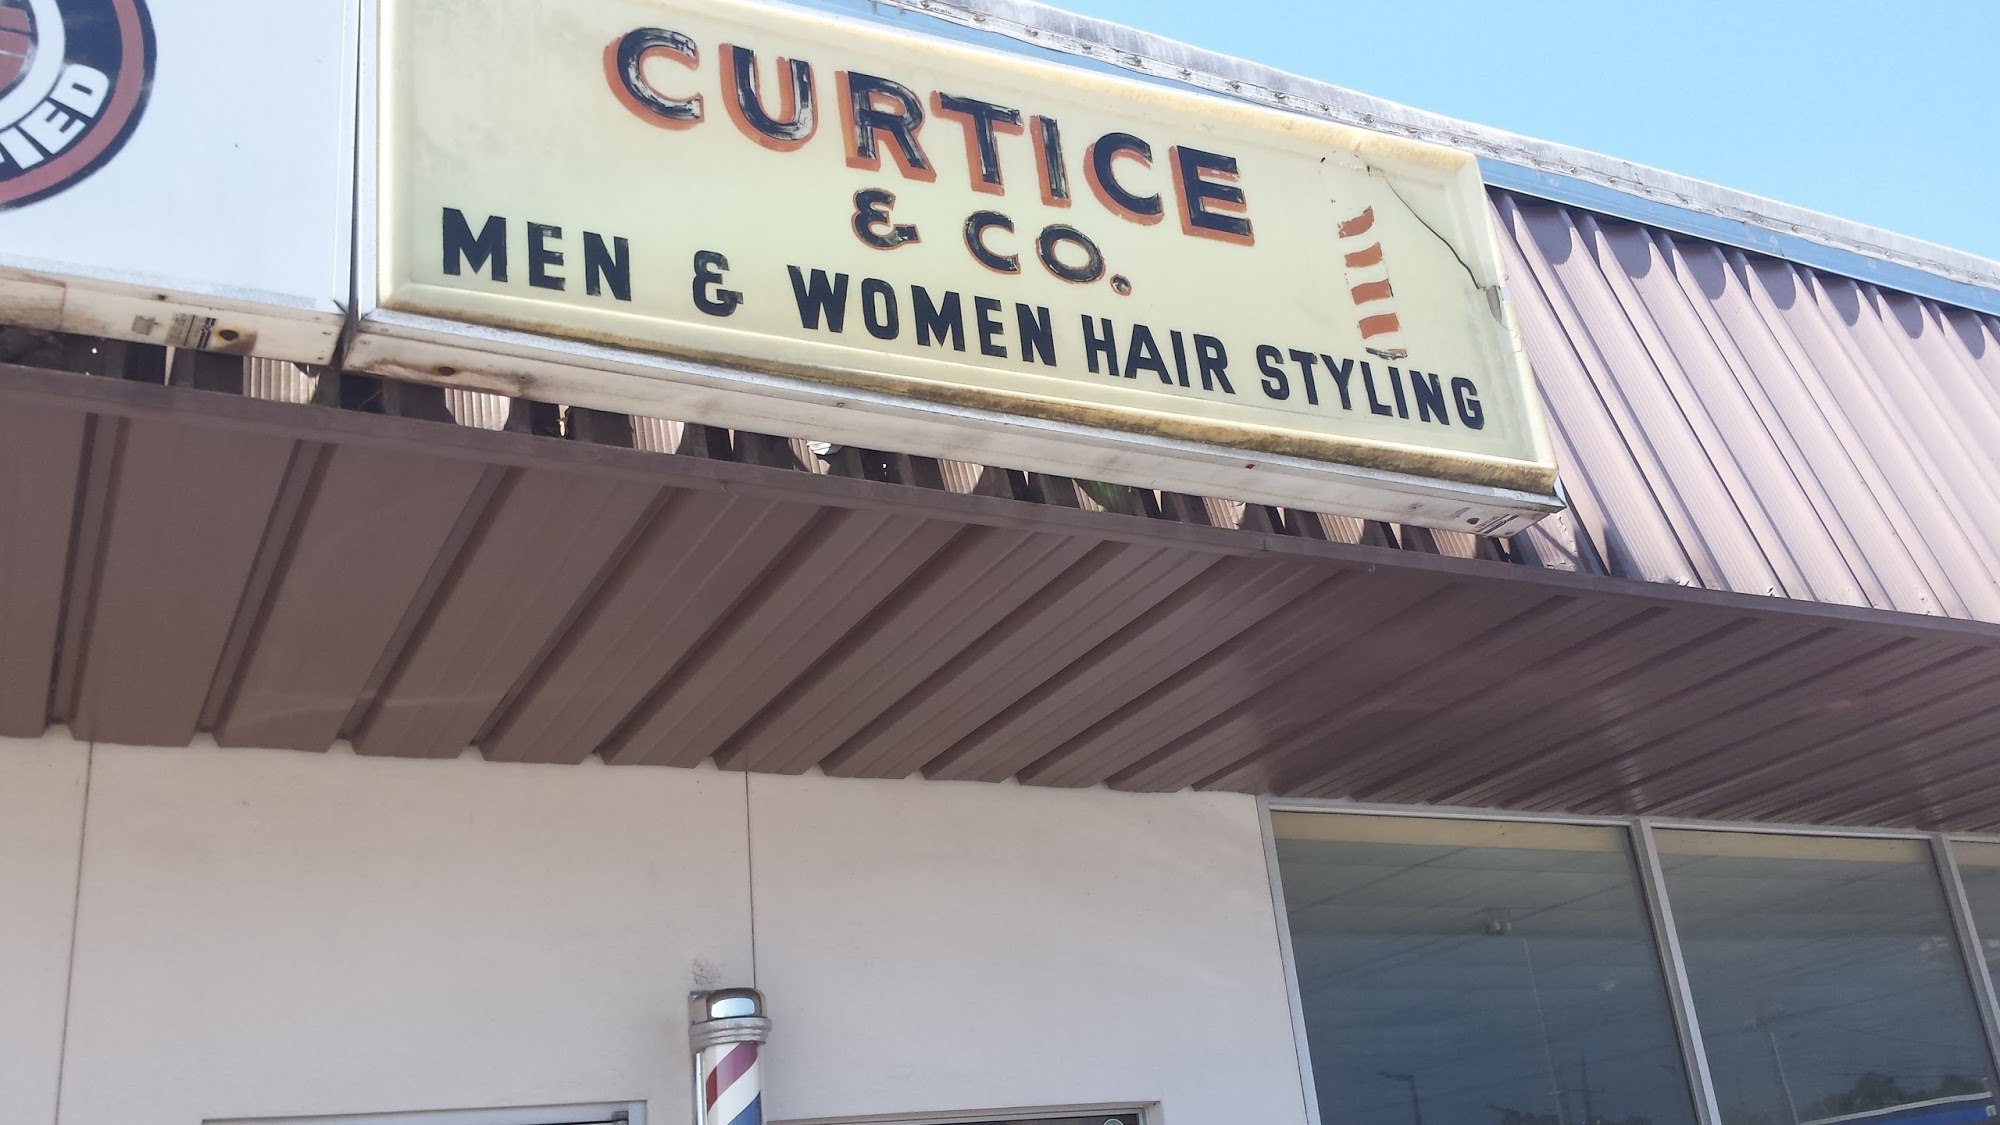 Curtice & Co